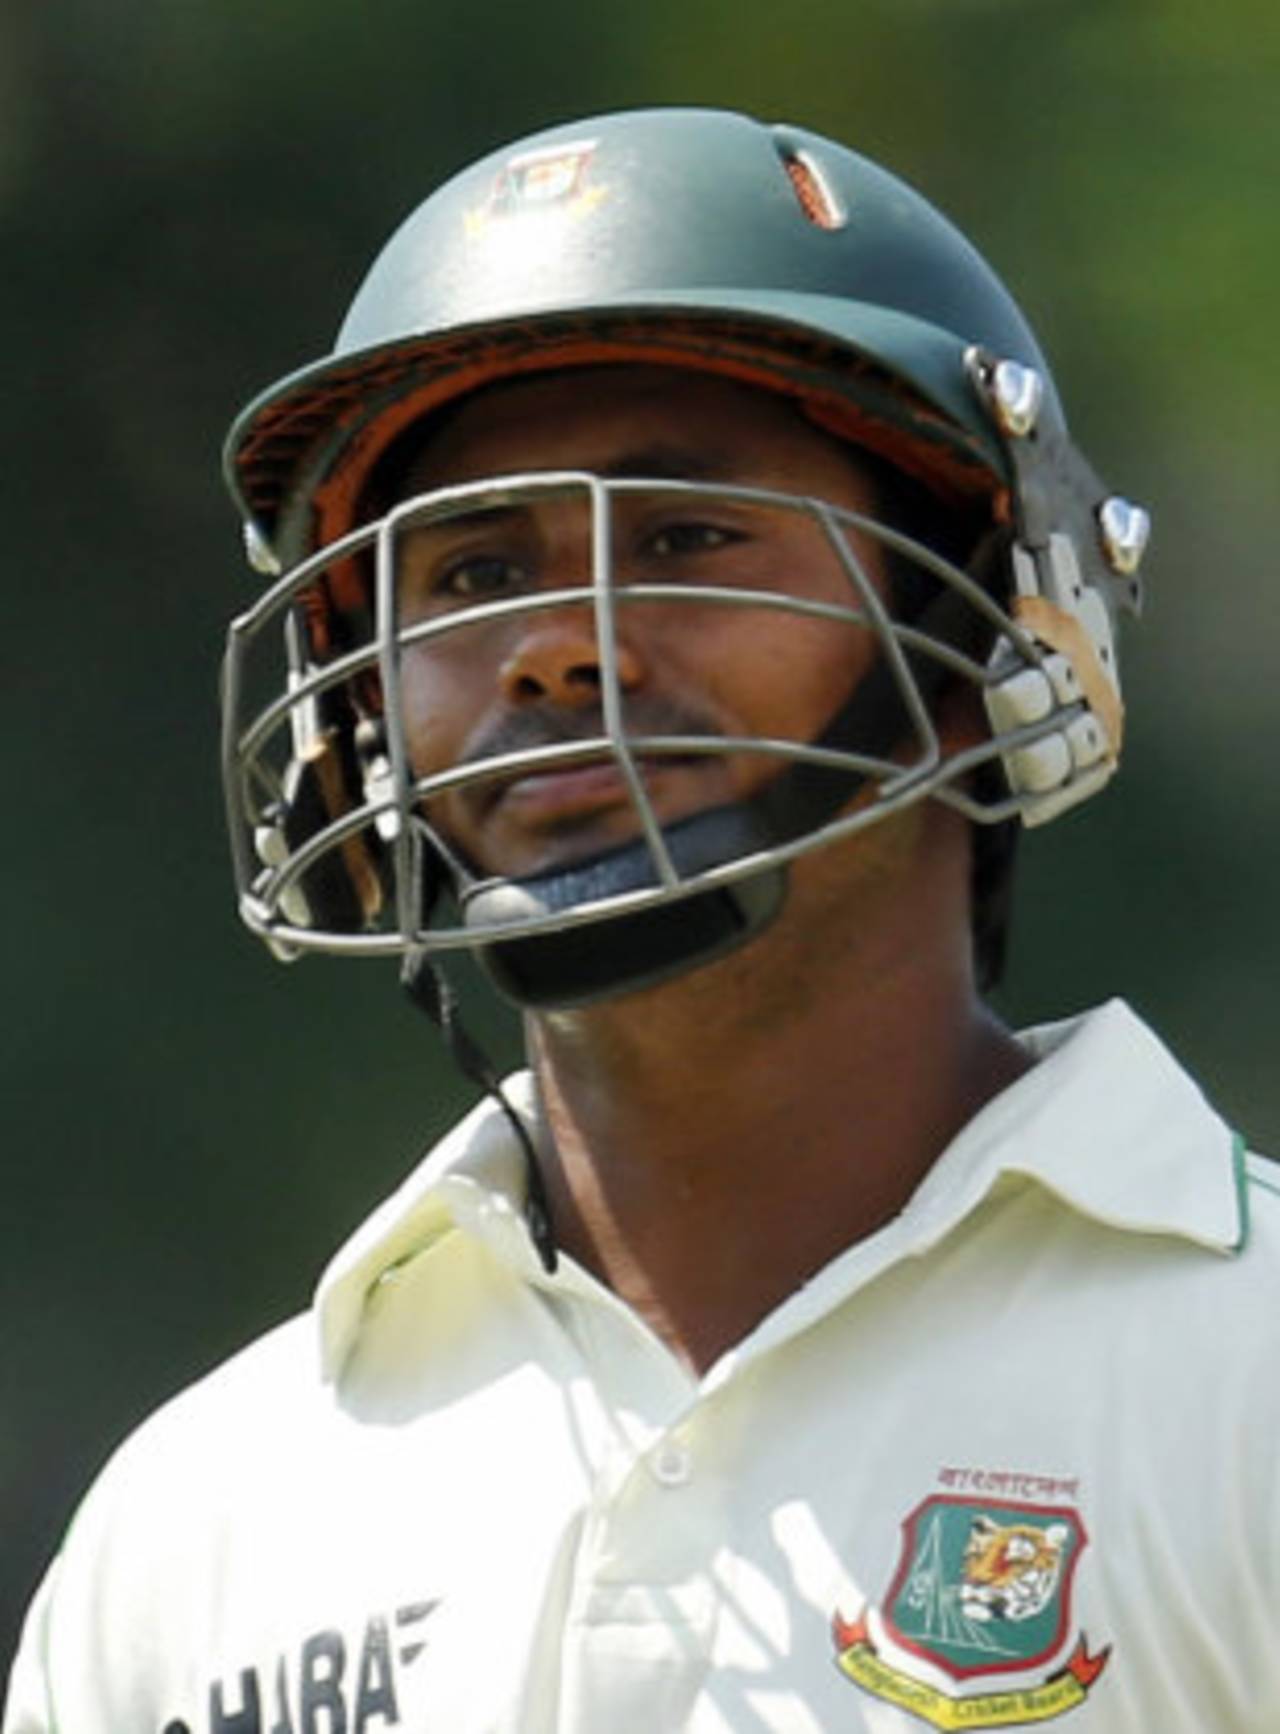 Mohammad Ashraful confessed to his involvement in alleged match-fixing and spot-fixing activities during the Bangladesh Premier League earlier in the year&nbsp;&nbsp;&bull;&nbsp;&nbsp;Associated Press